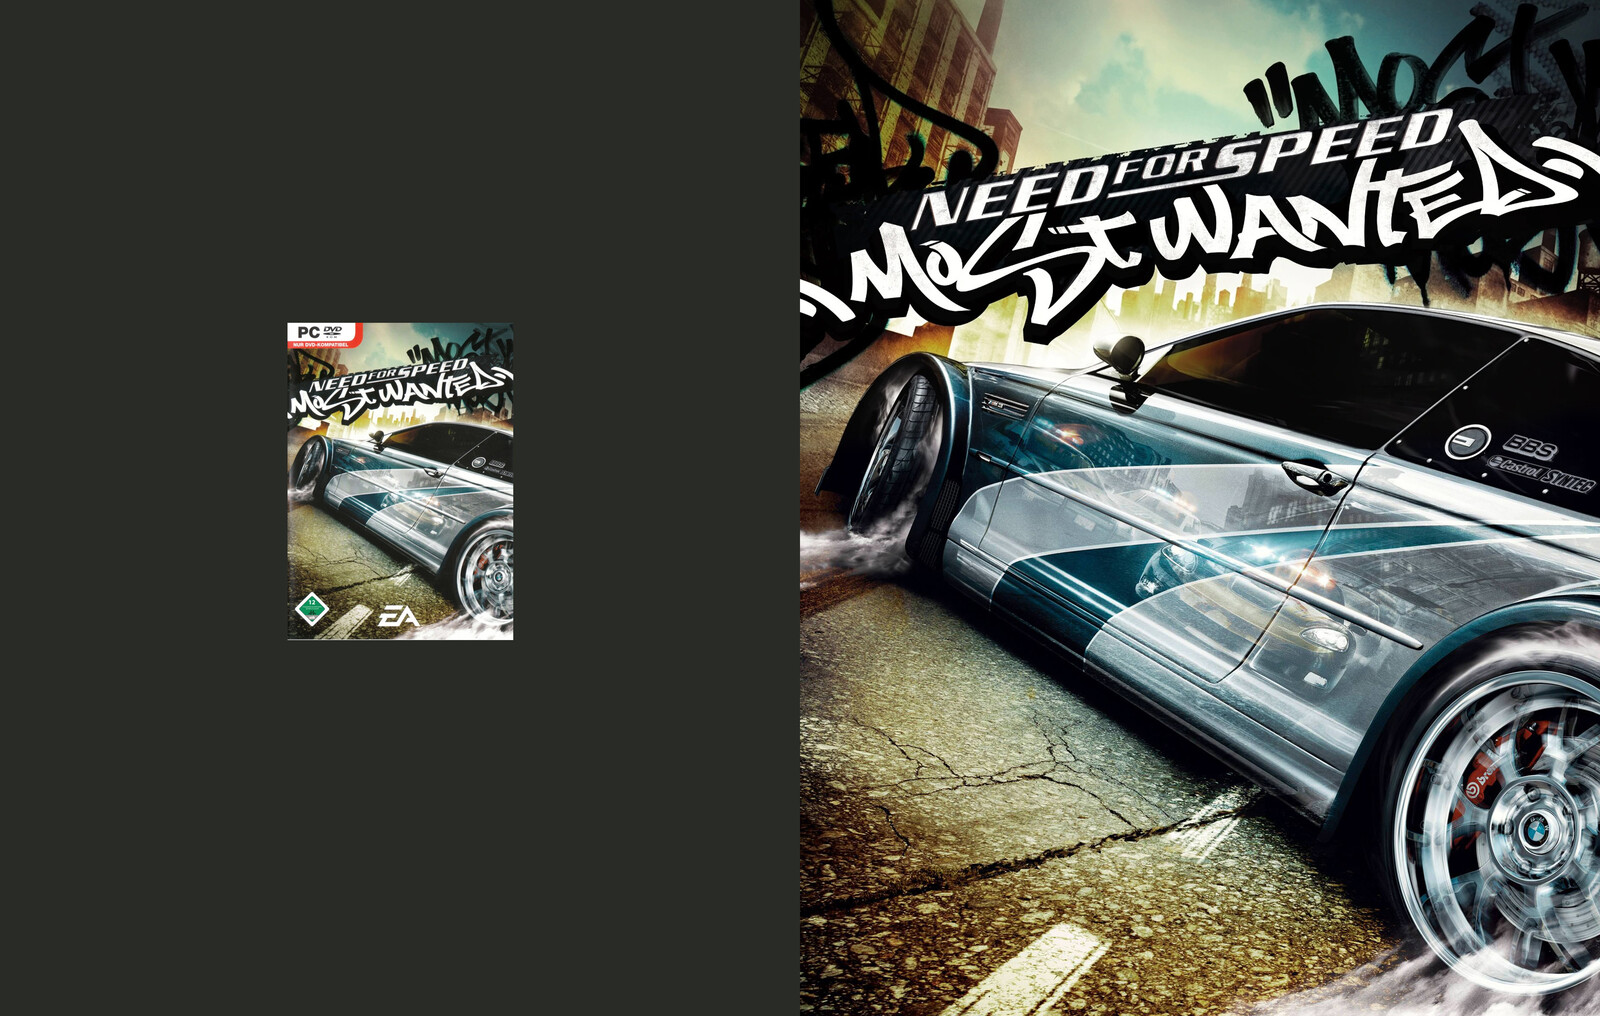 Need for Speed: Most Wanted (Original Scan vs. Poster format)